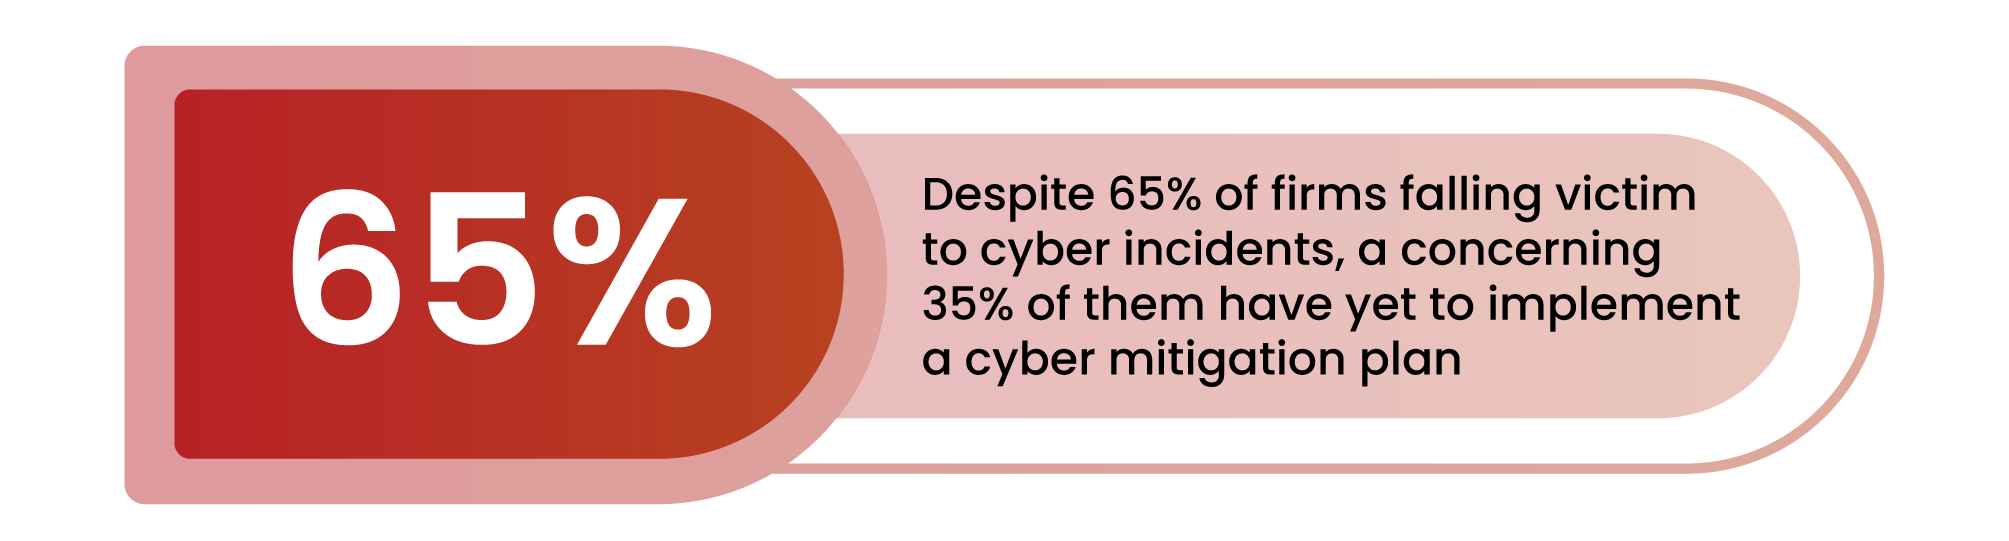 Cyber Security for Law Firms Statistic